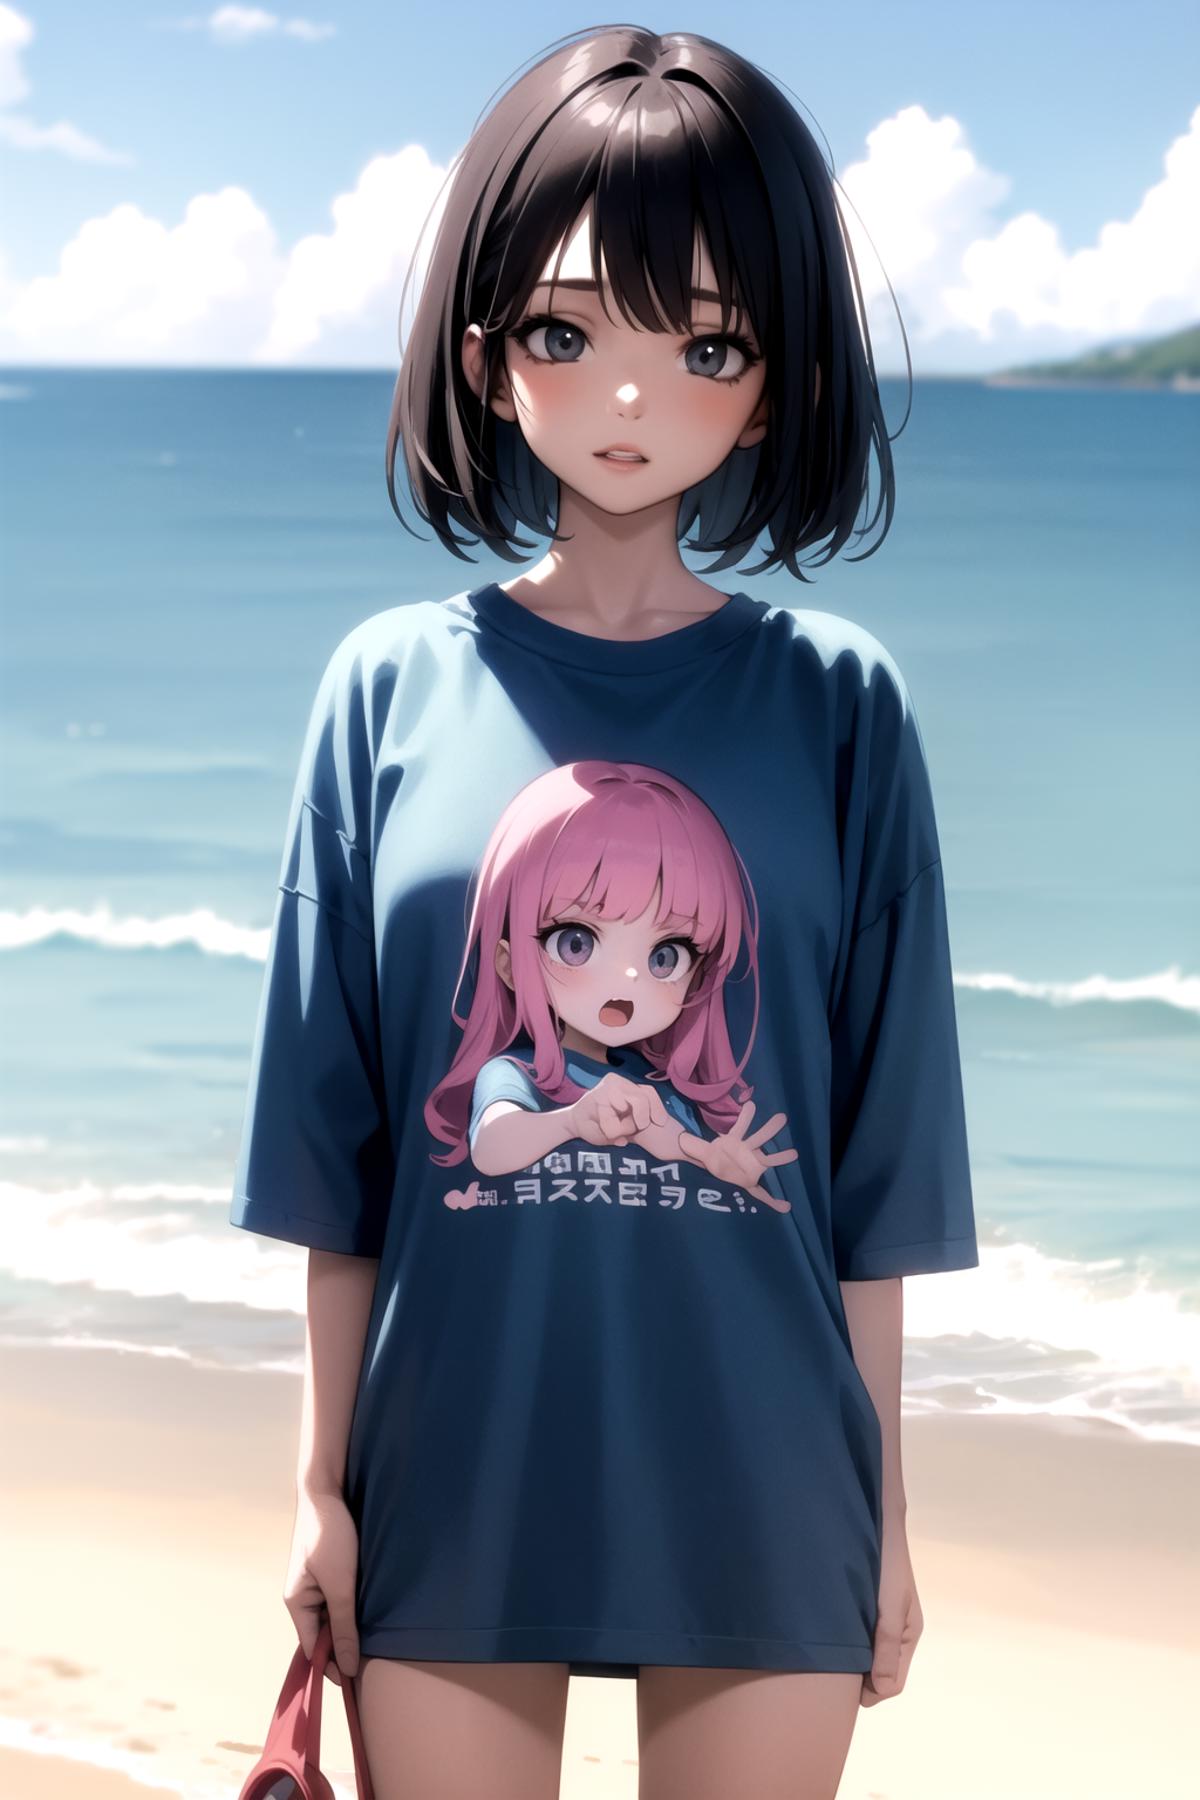 Oversized shirt / clothes image by psoft